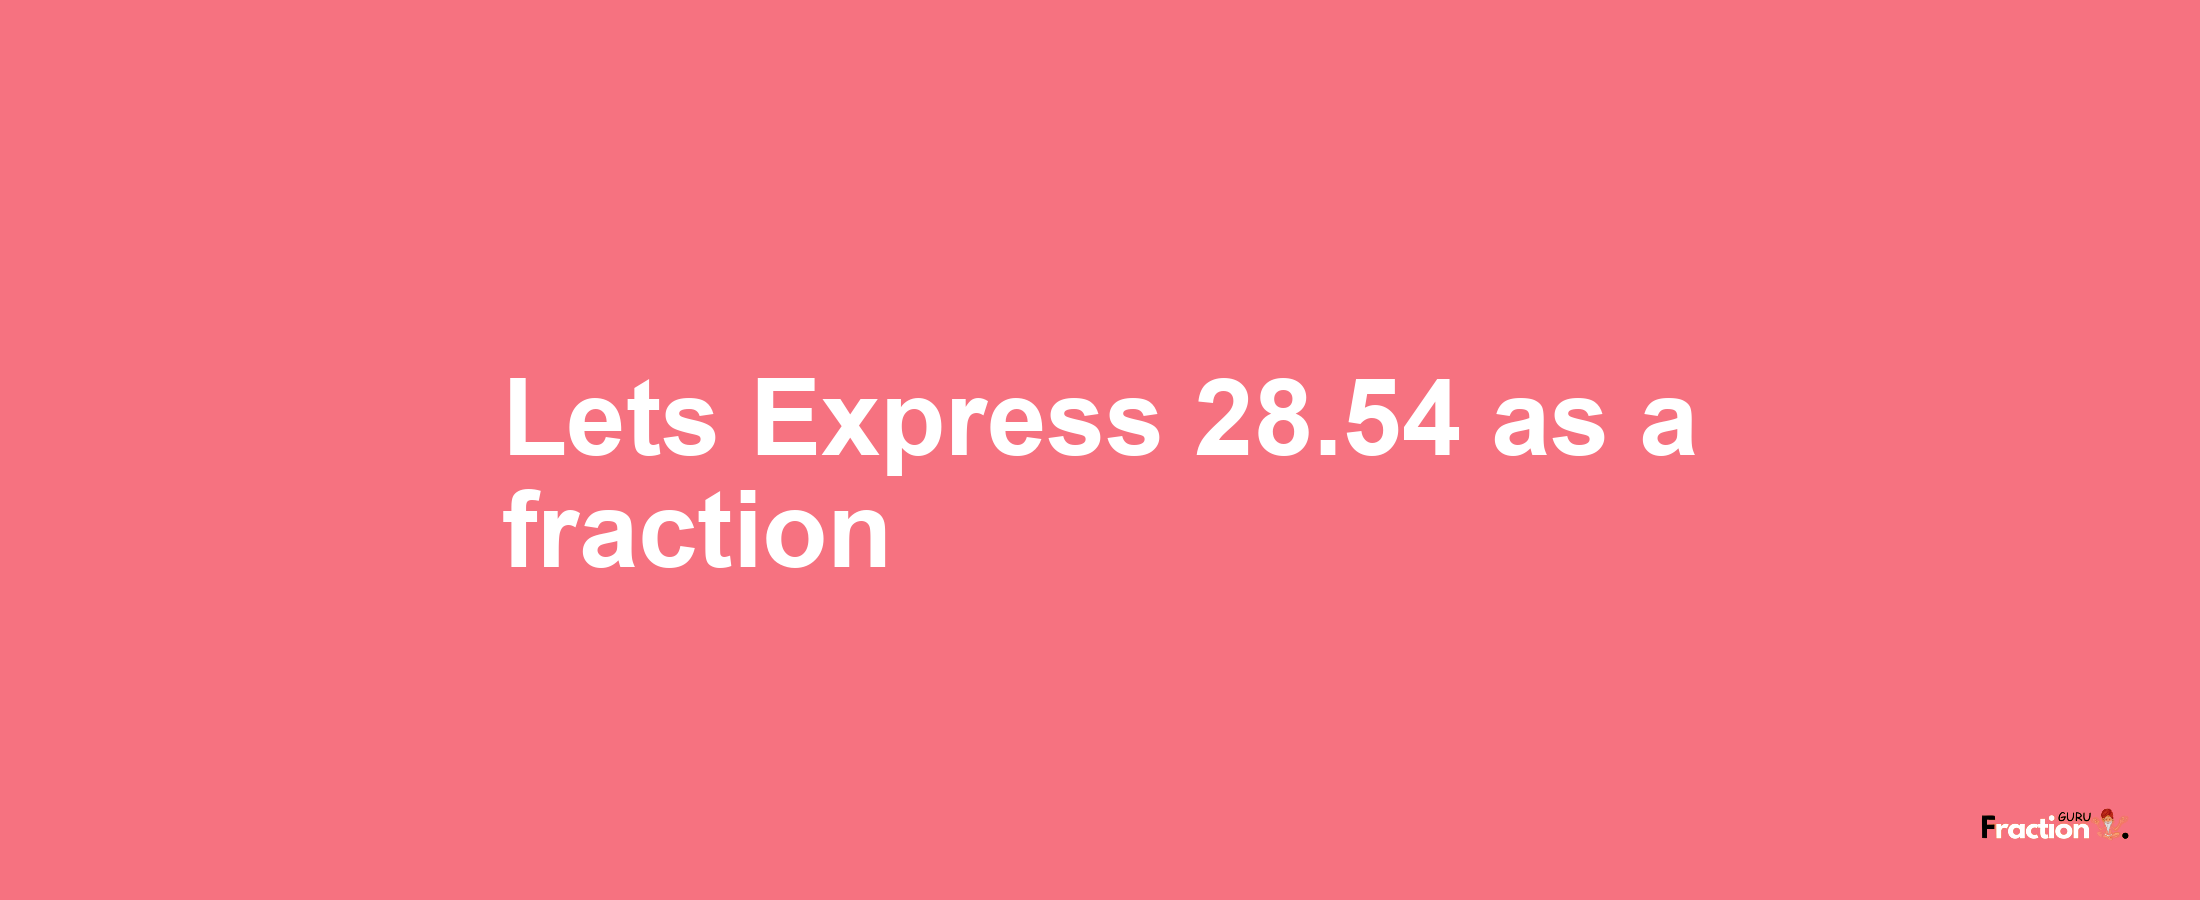 Lets Express 28.54 as afraction